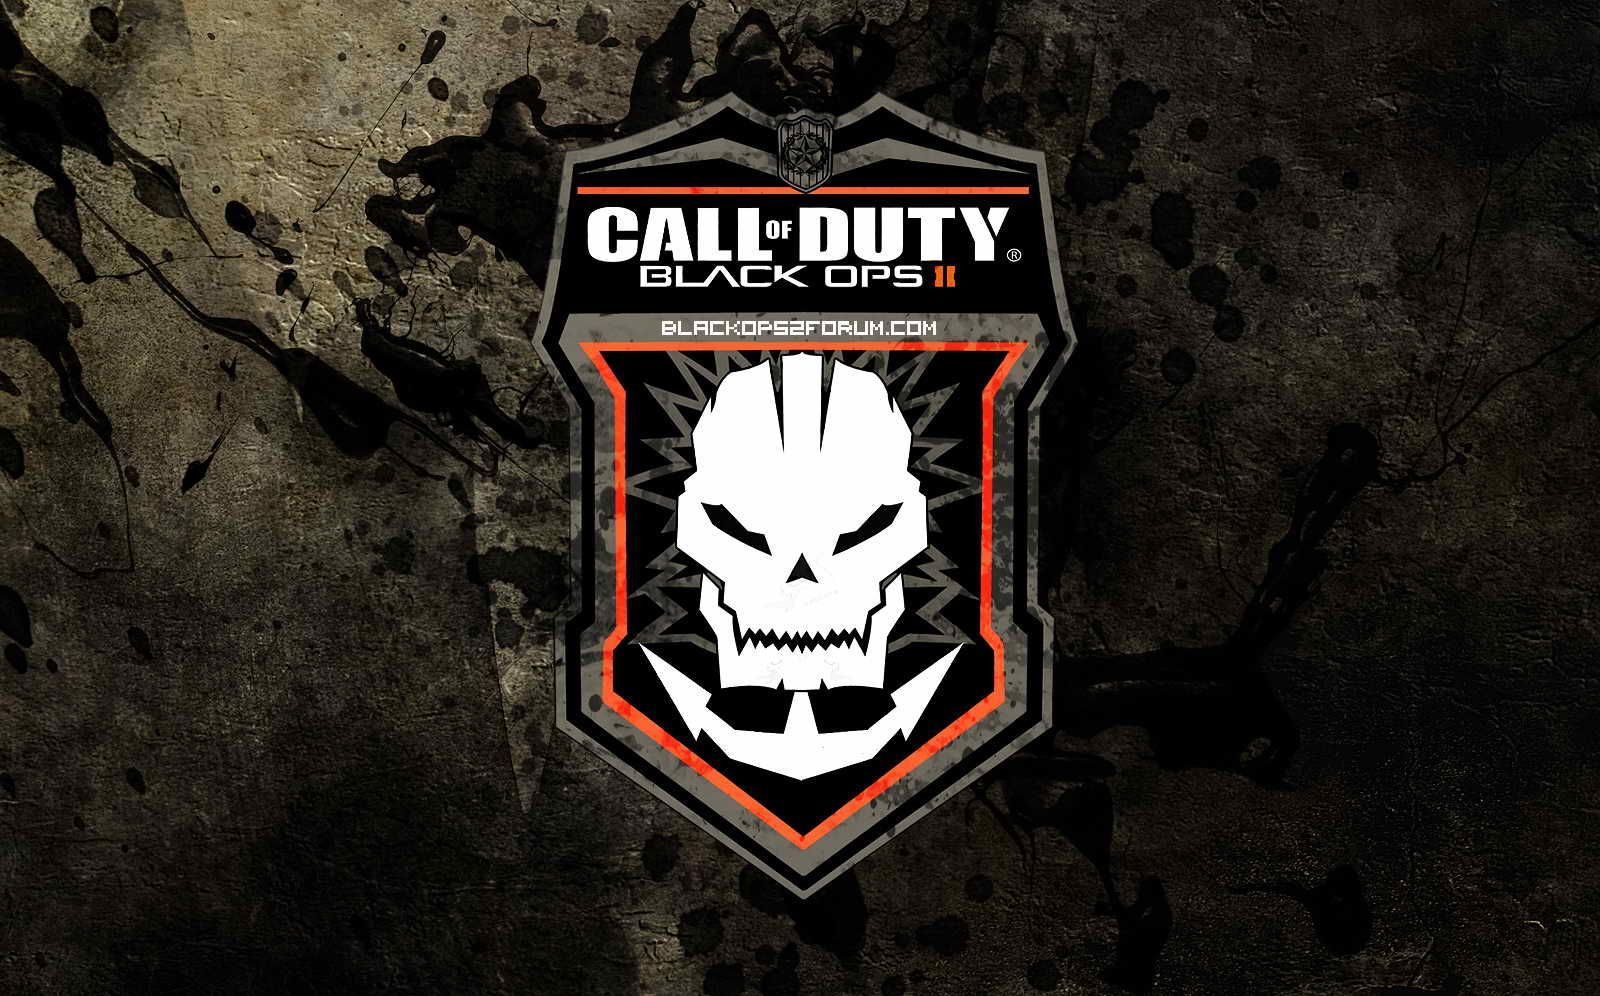 HD WALLPAPERS: Call of Duty Black ops 2 HD Wallpaper. Call of duty, Call duty black ops, Black ops